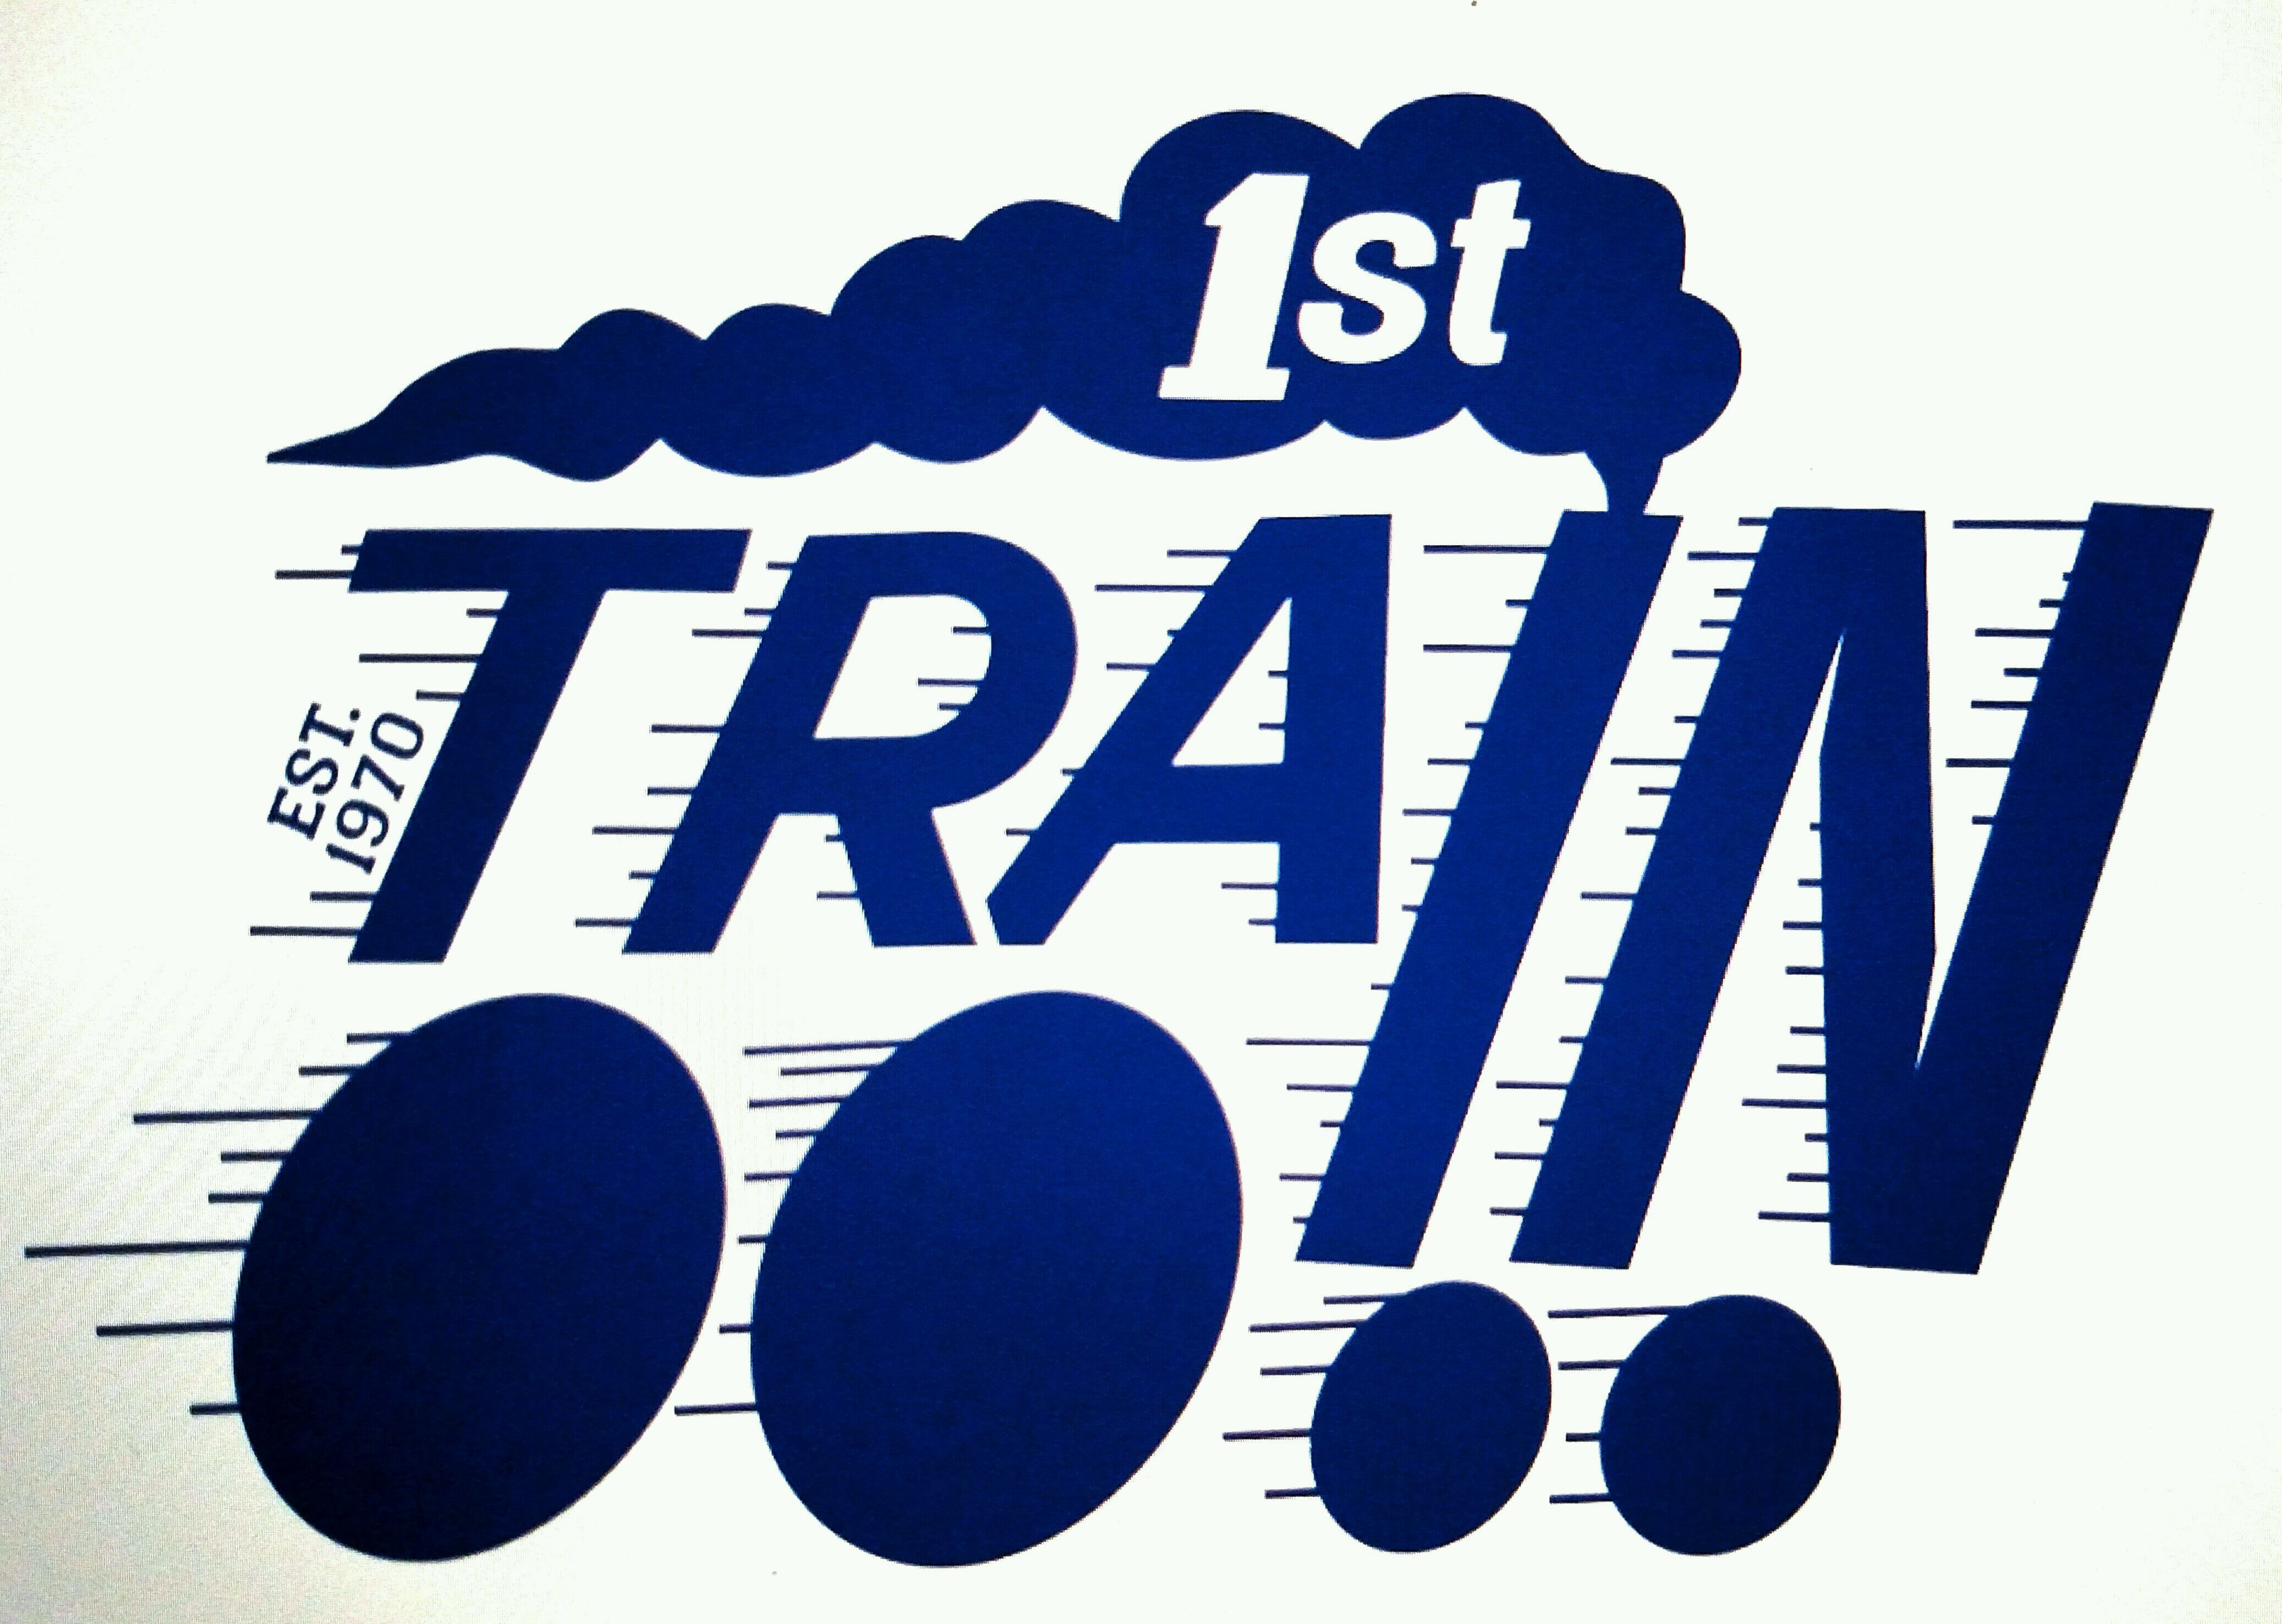 lst Train band welcomes you!!.